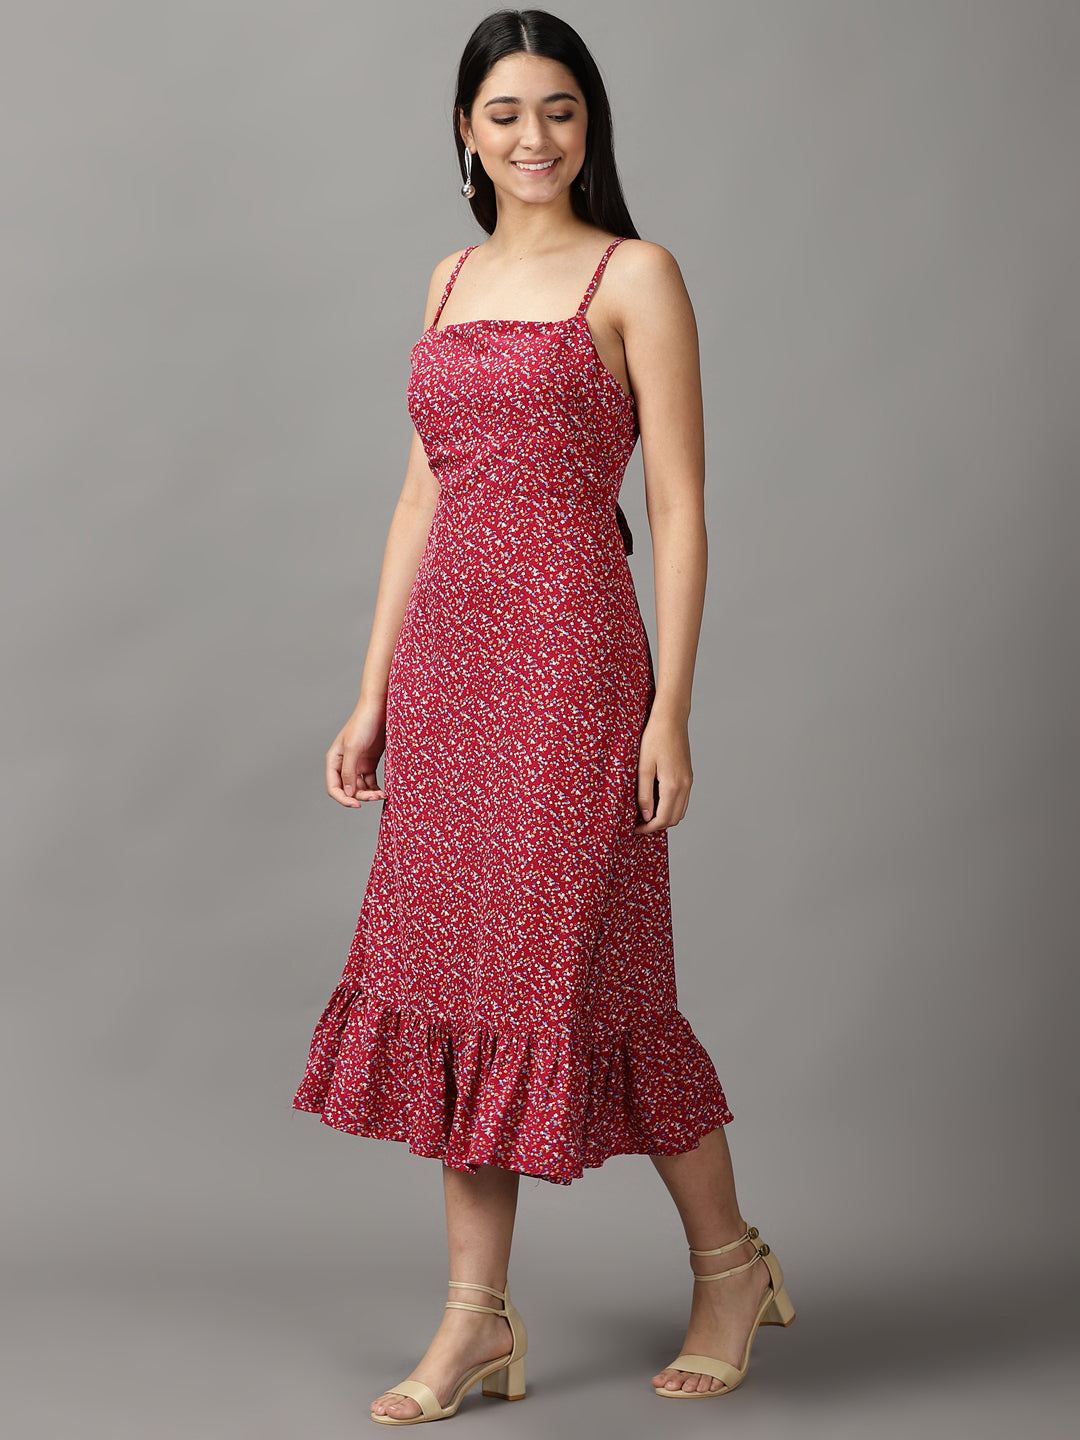 Women's Red Floral Fit and Flare Dress